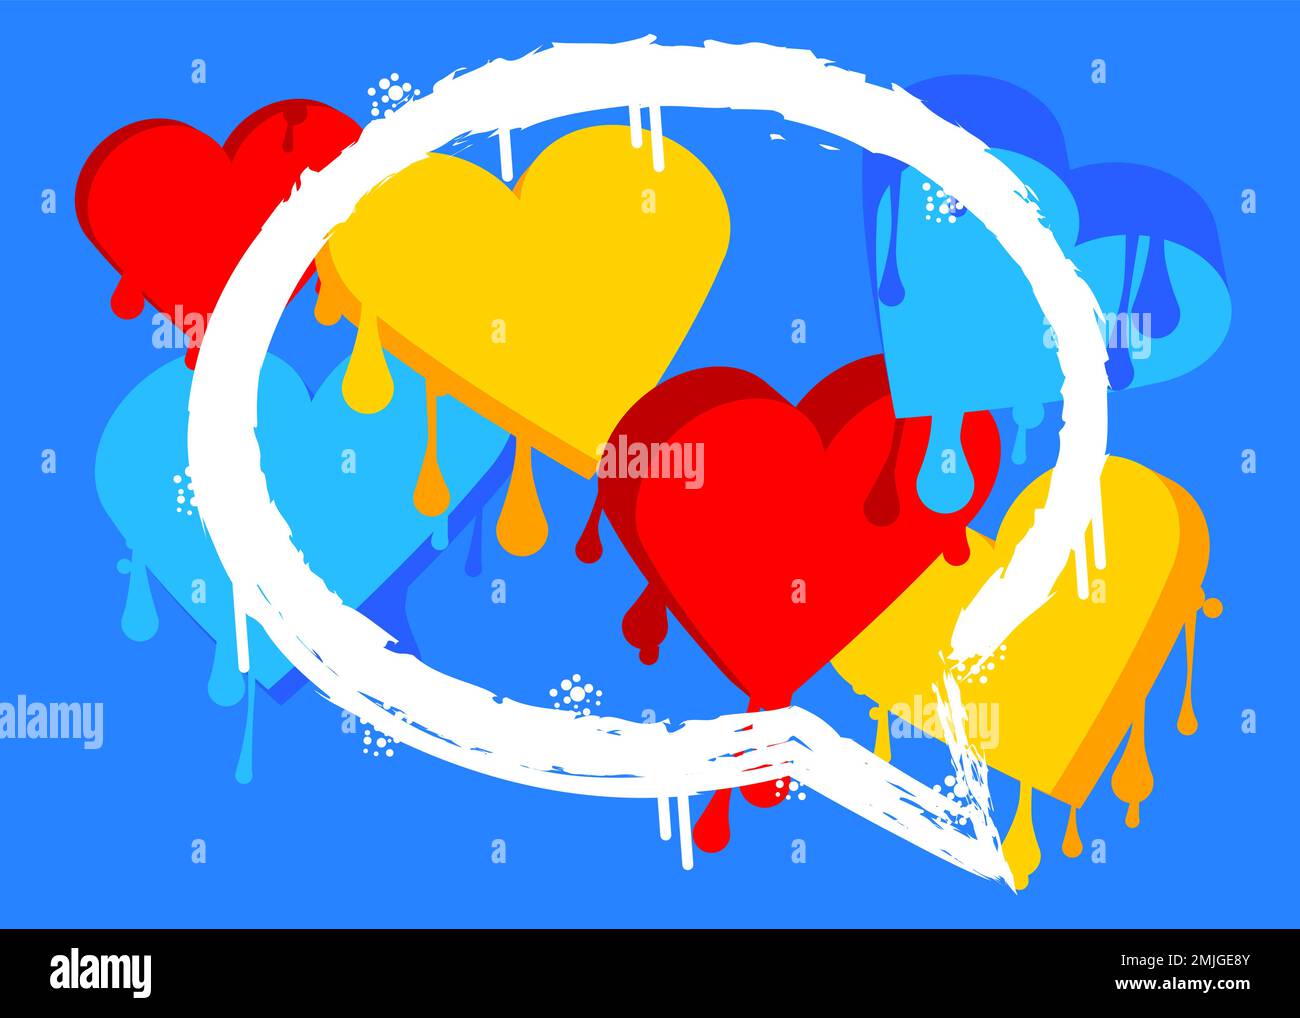 Graffiti Love Background with Hearts. Abstract modern Valentine's Day street art decoration performed in urban painting style. Stock Vector